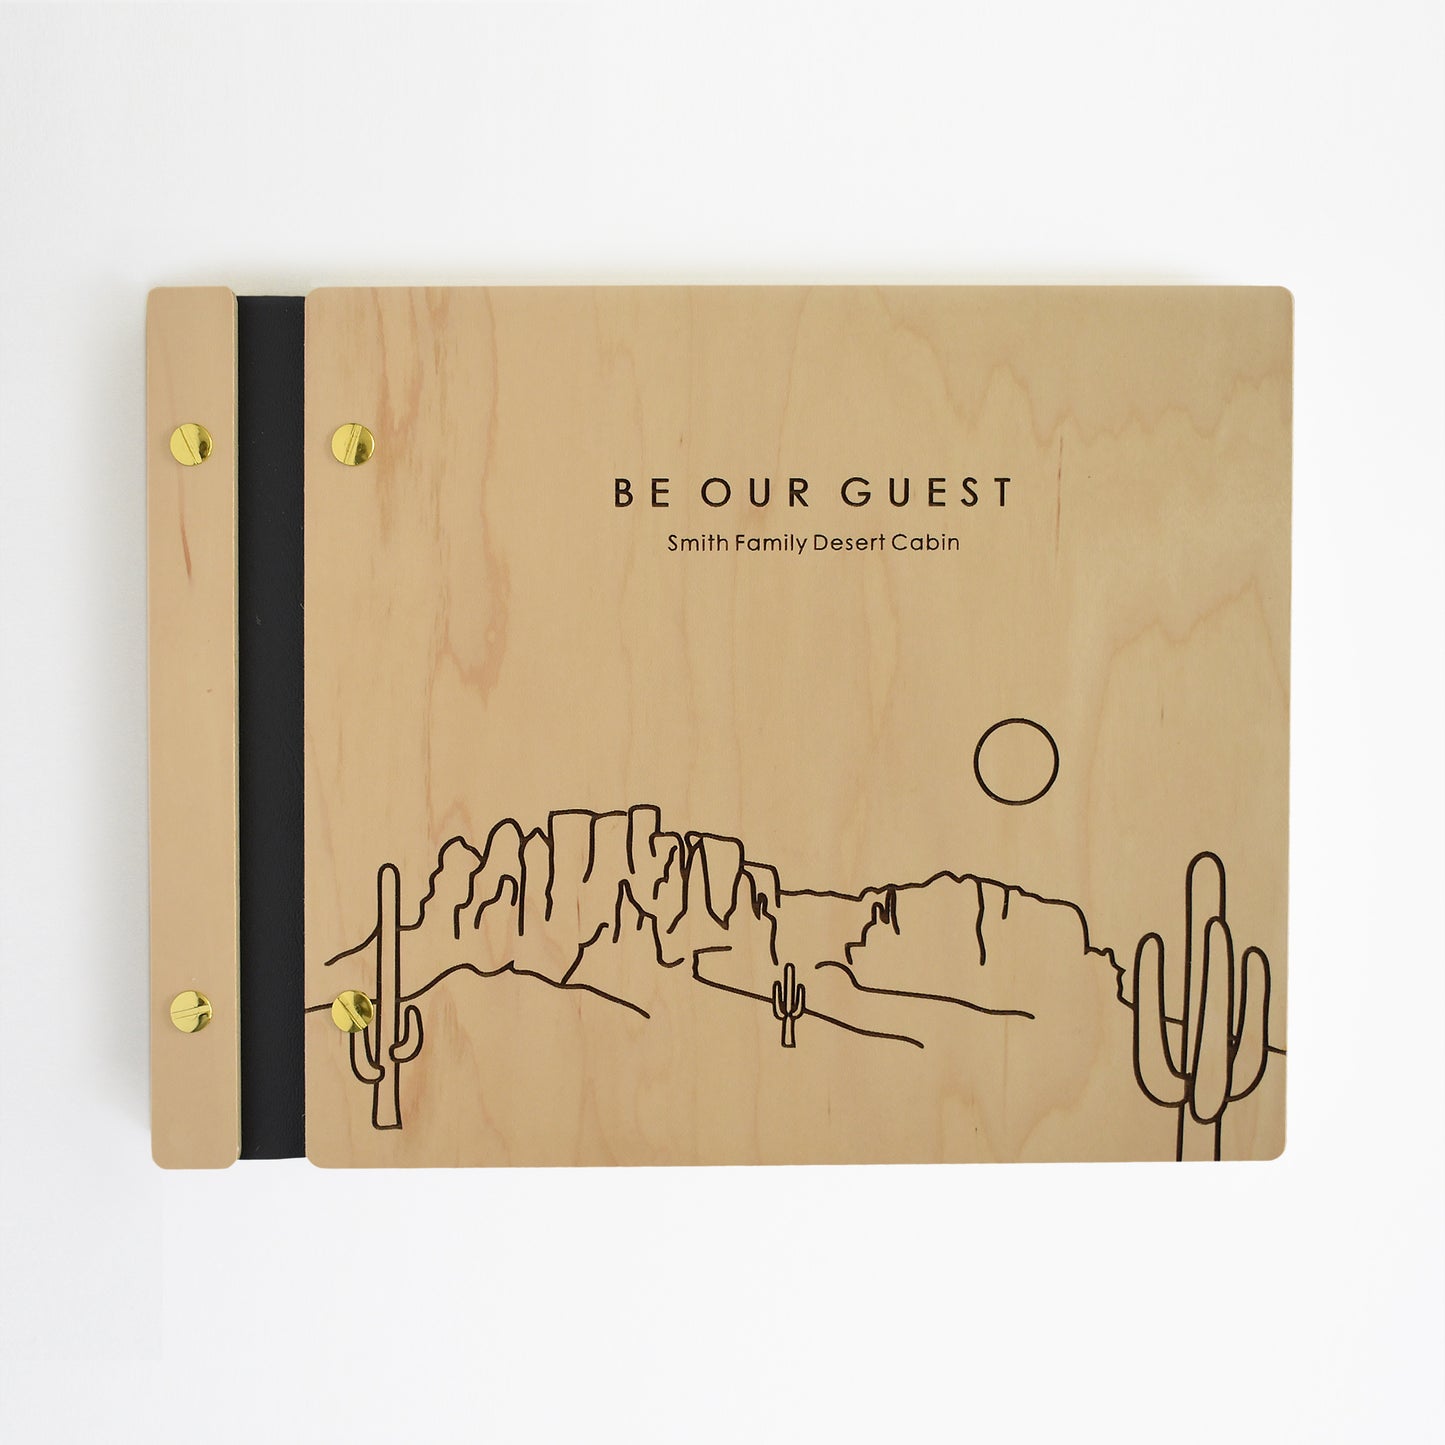 An 8.5x11" Airbnb guest book lies on a table. Made of maple wood, aqua vegan leather binding, and gold hardware. The front cover reads Be Our Guest, Smith Family Desert Cabin.